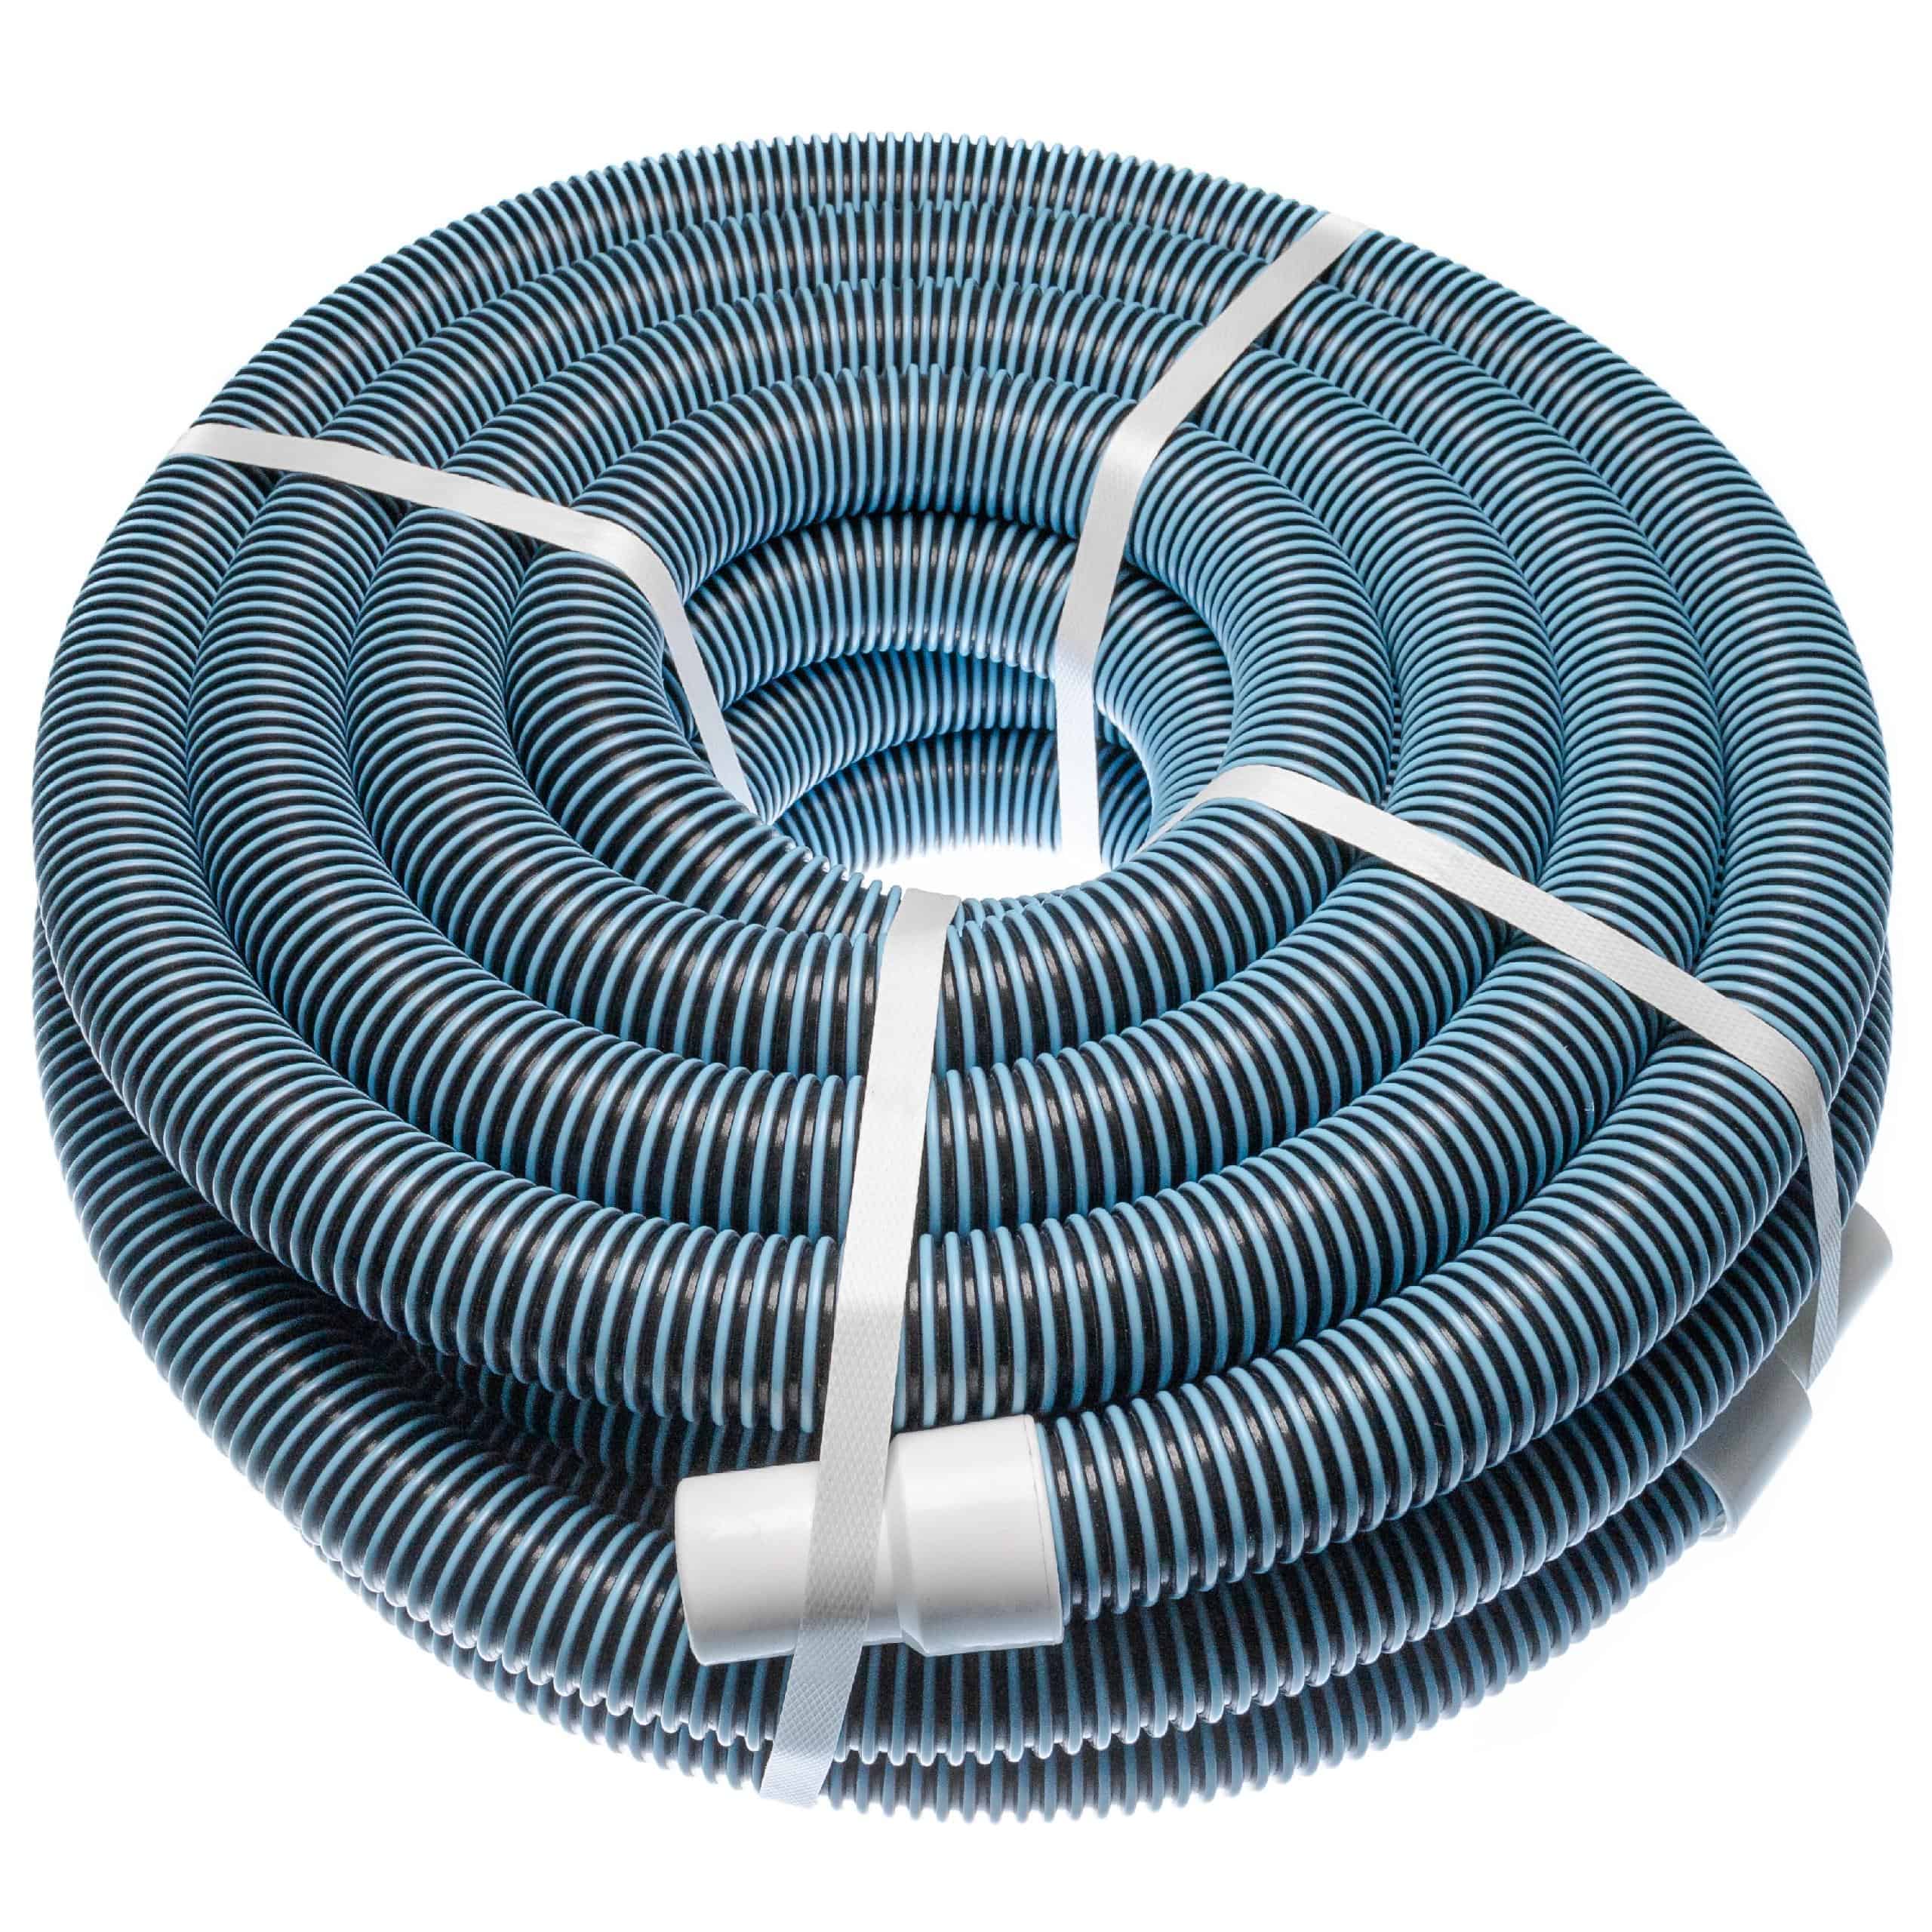 Hose Pipe suitable for Skimmer, Filter, Pool Cleaner Robot - connector 32 mm, 15 m